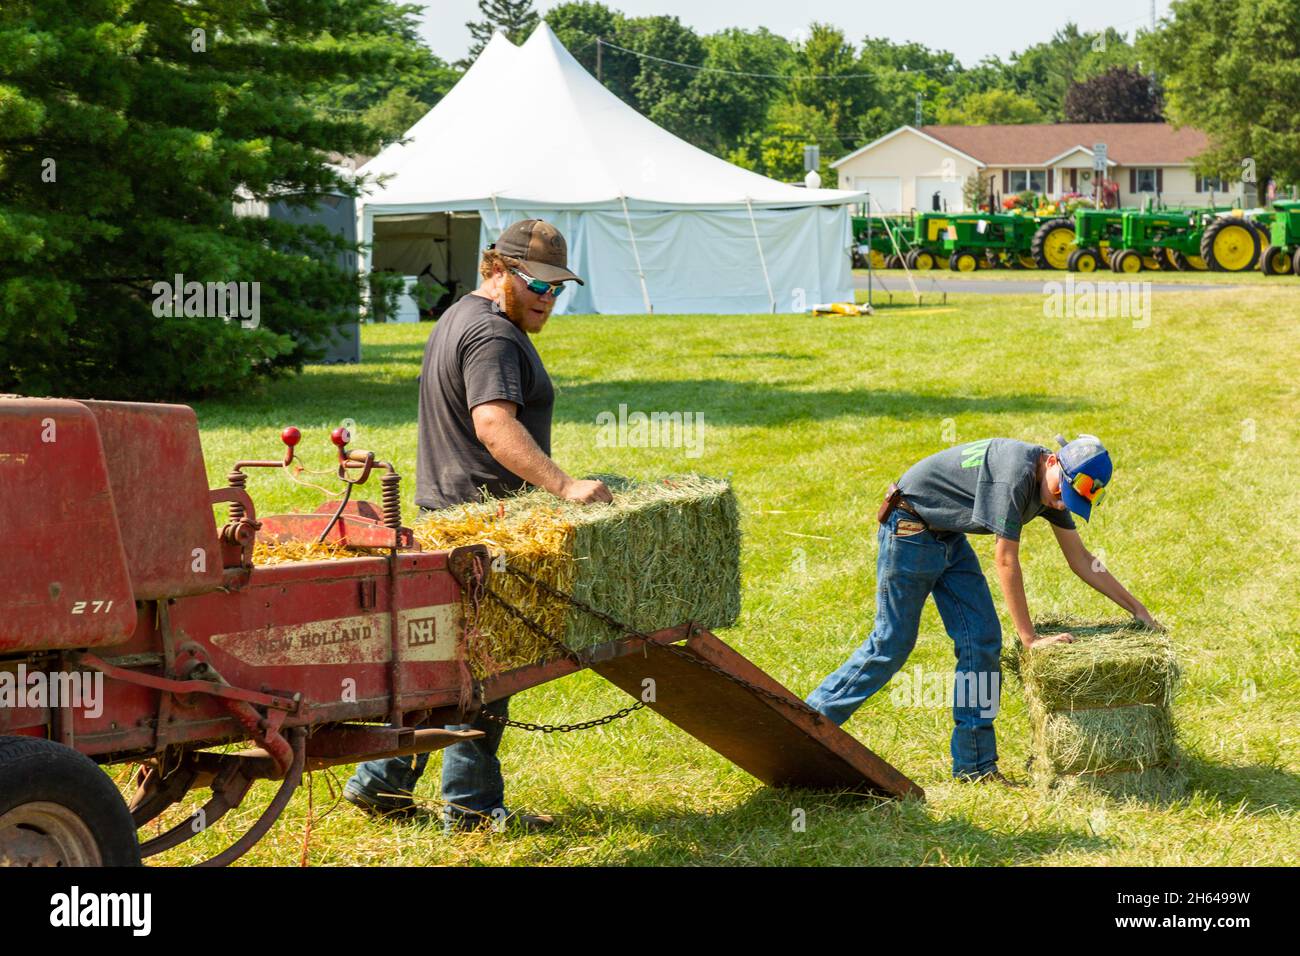 Two young farmers demonstrate the use of an antique New Holland model 271 hay baler at a tractor show in Warren, Indiana, USA. Stock Photo